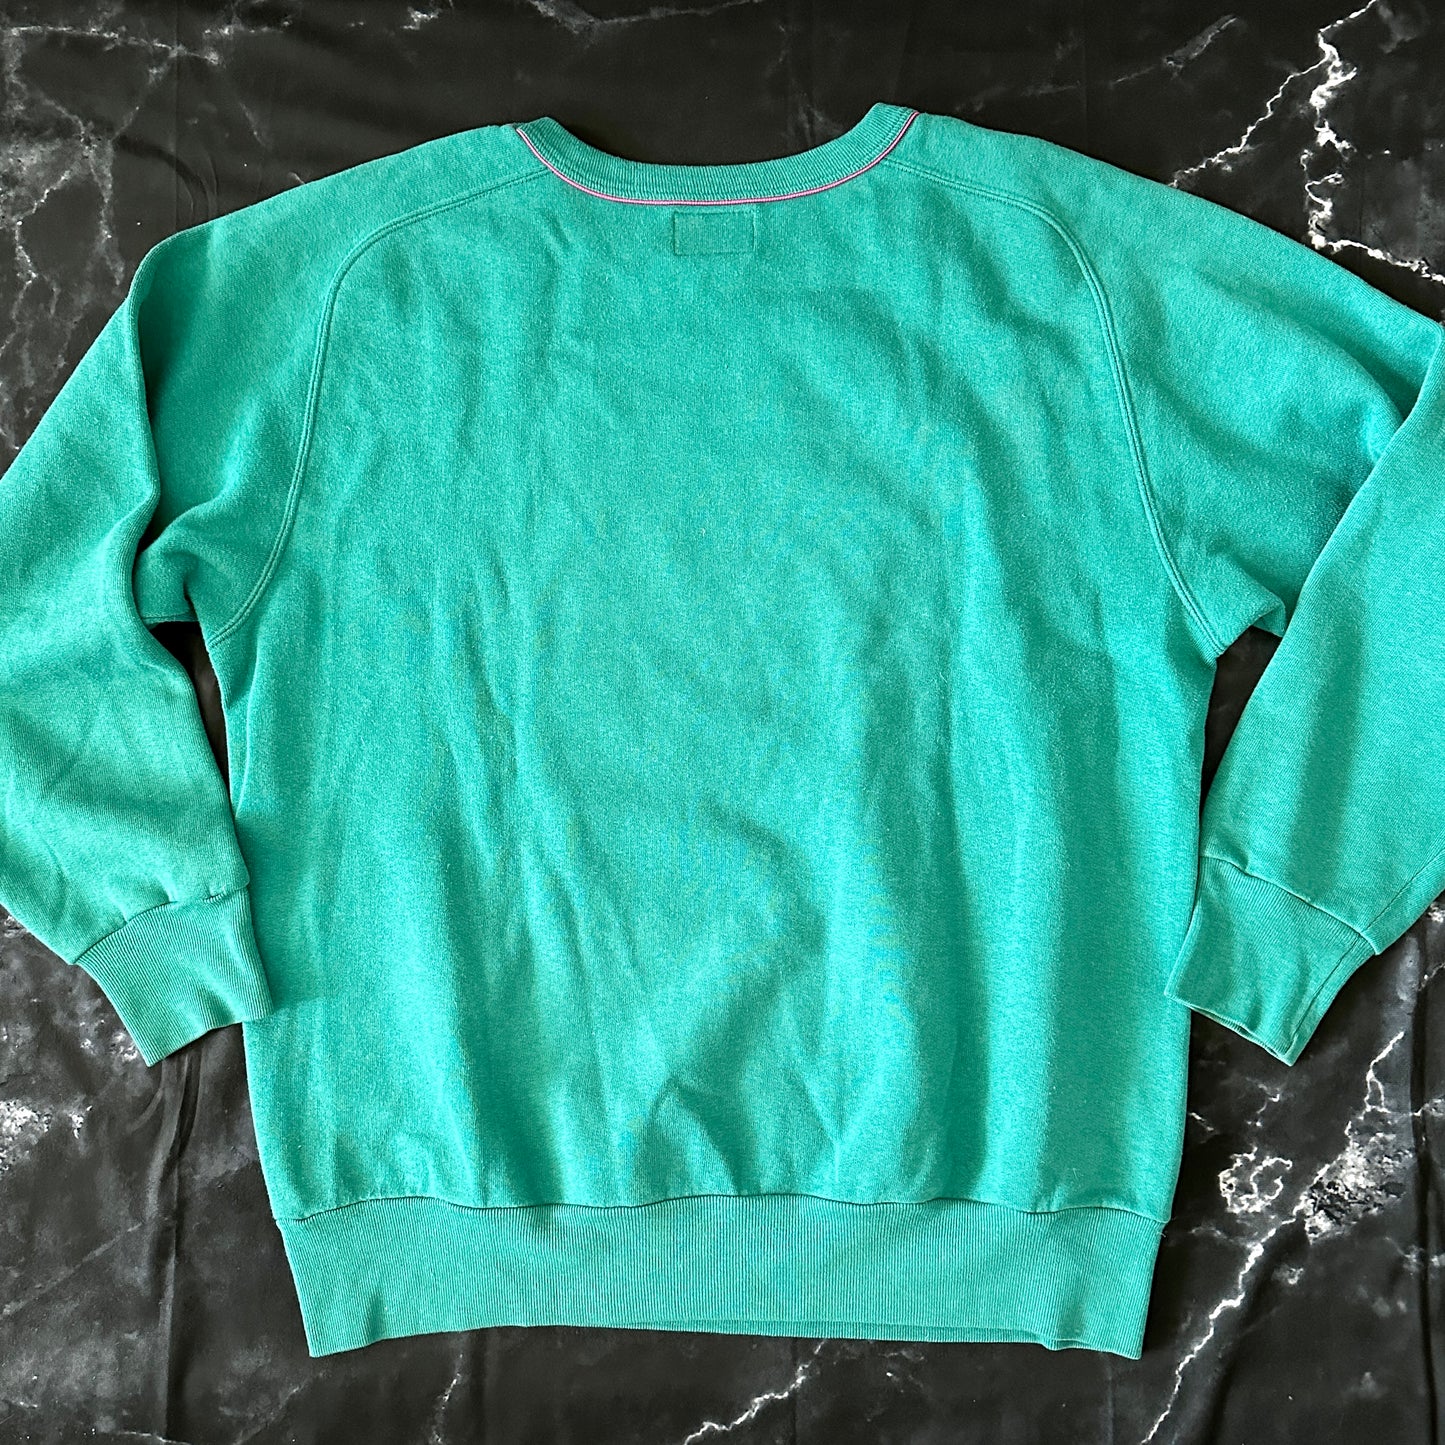 American System 80s Vintage Sweatshirt- XL - Made in Italy